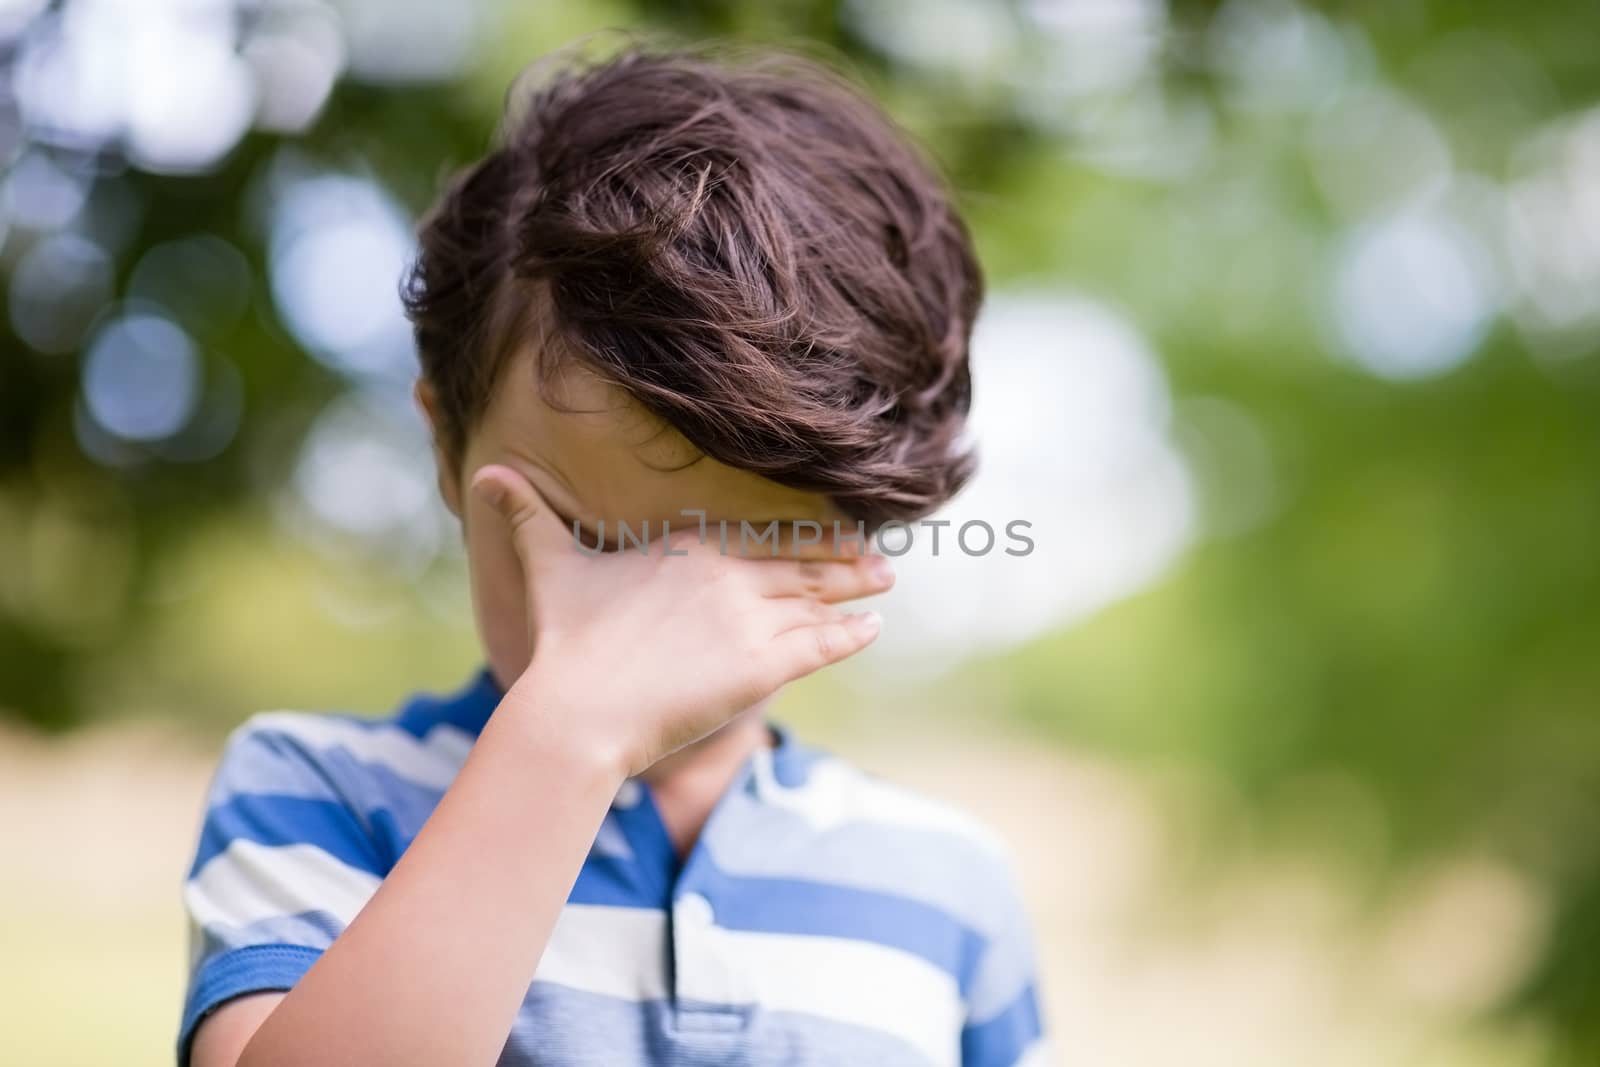 Boy covering eyes with hand in park by Wavebreakmedia